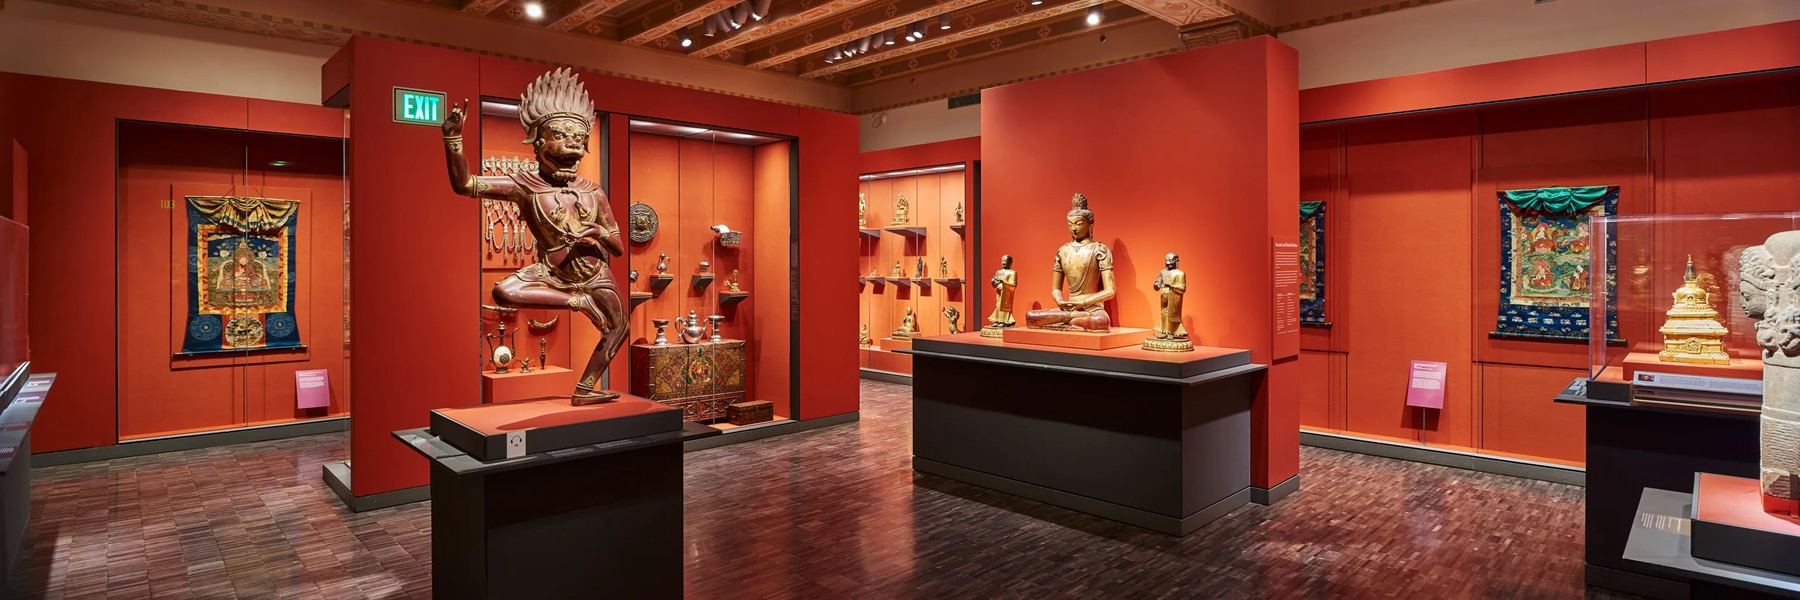 Best Art Museums To Visit In California